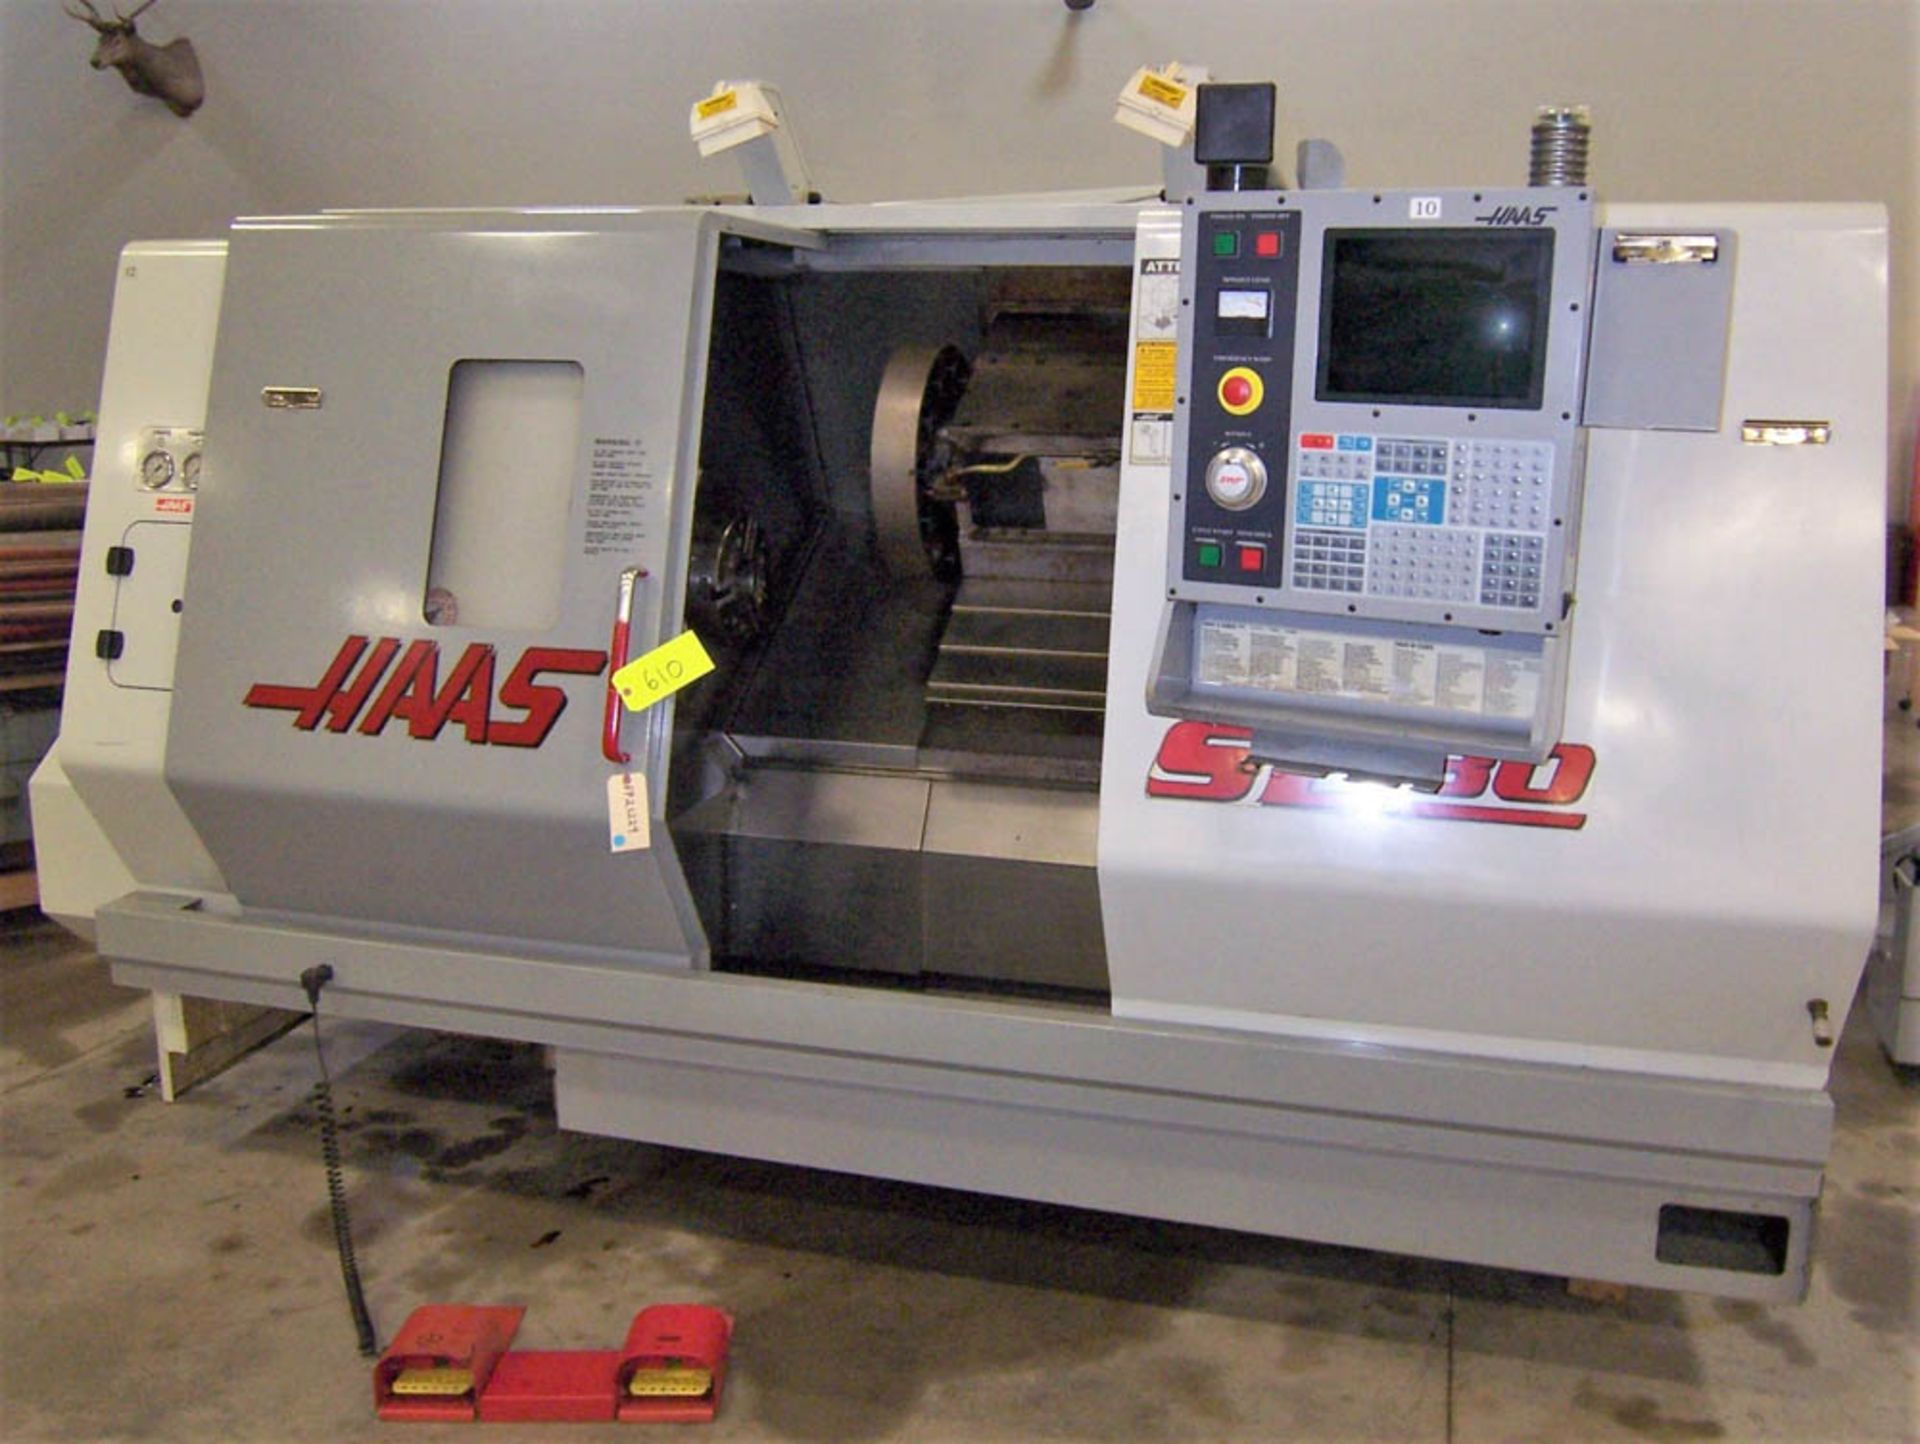 HAAS MDL. SL-30T CNC LATHE WITH HAAS CONTROL, 10" CHUCK, SWING DIAMETER: OVER FRONT APRON: 30", OVER - Image 2 of 6